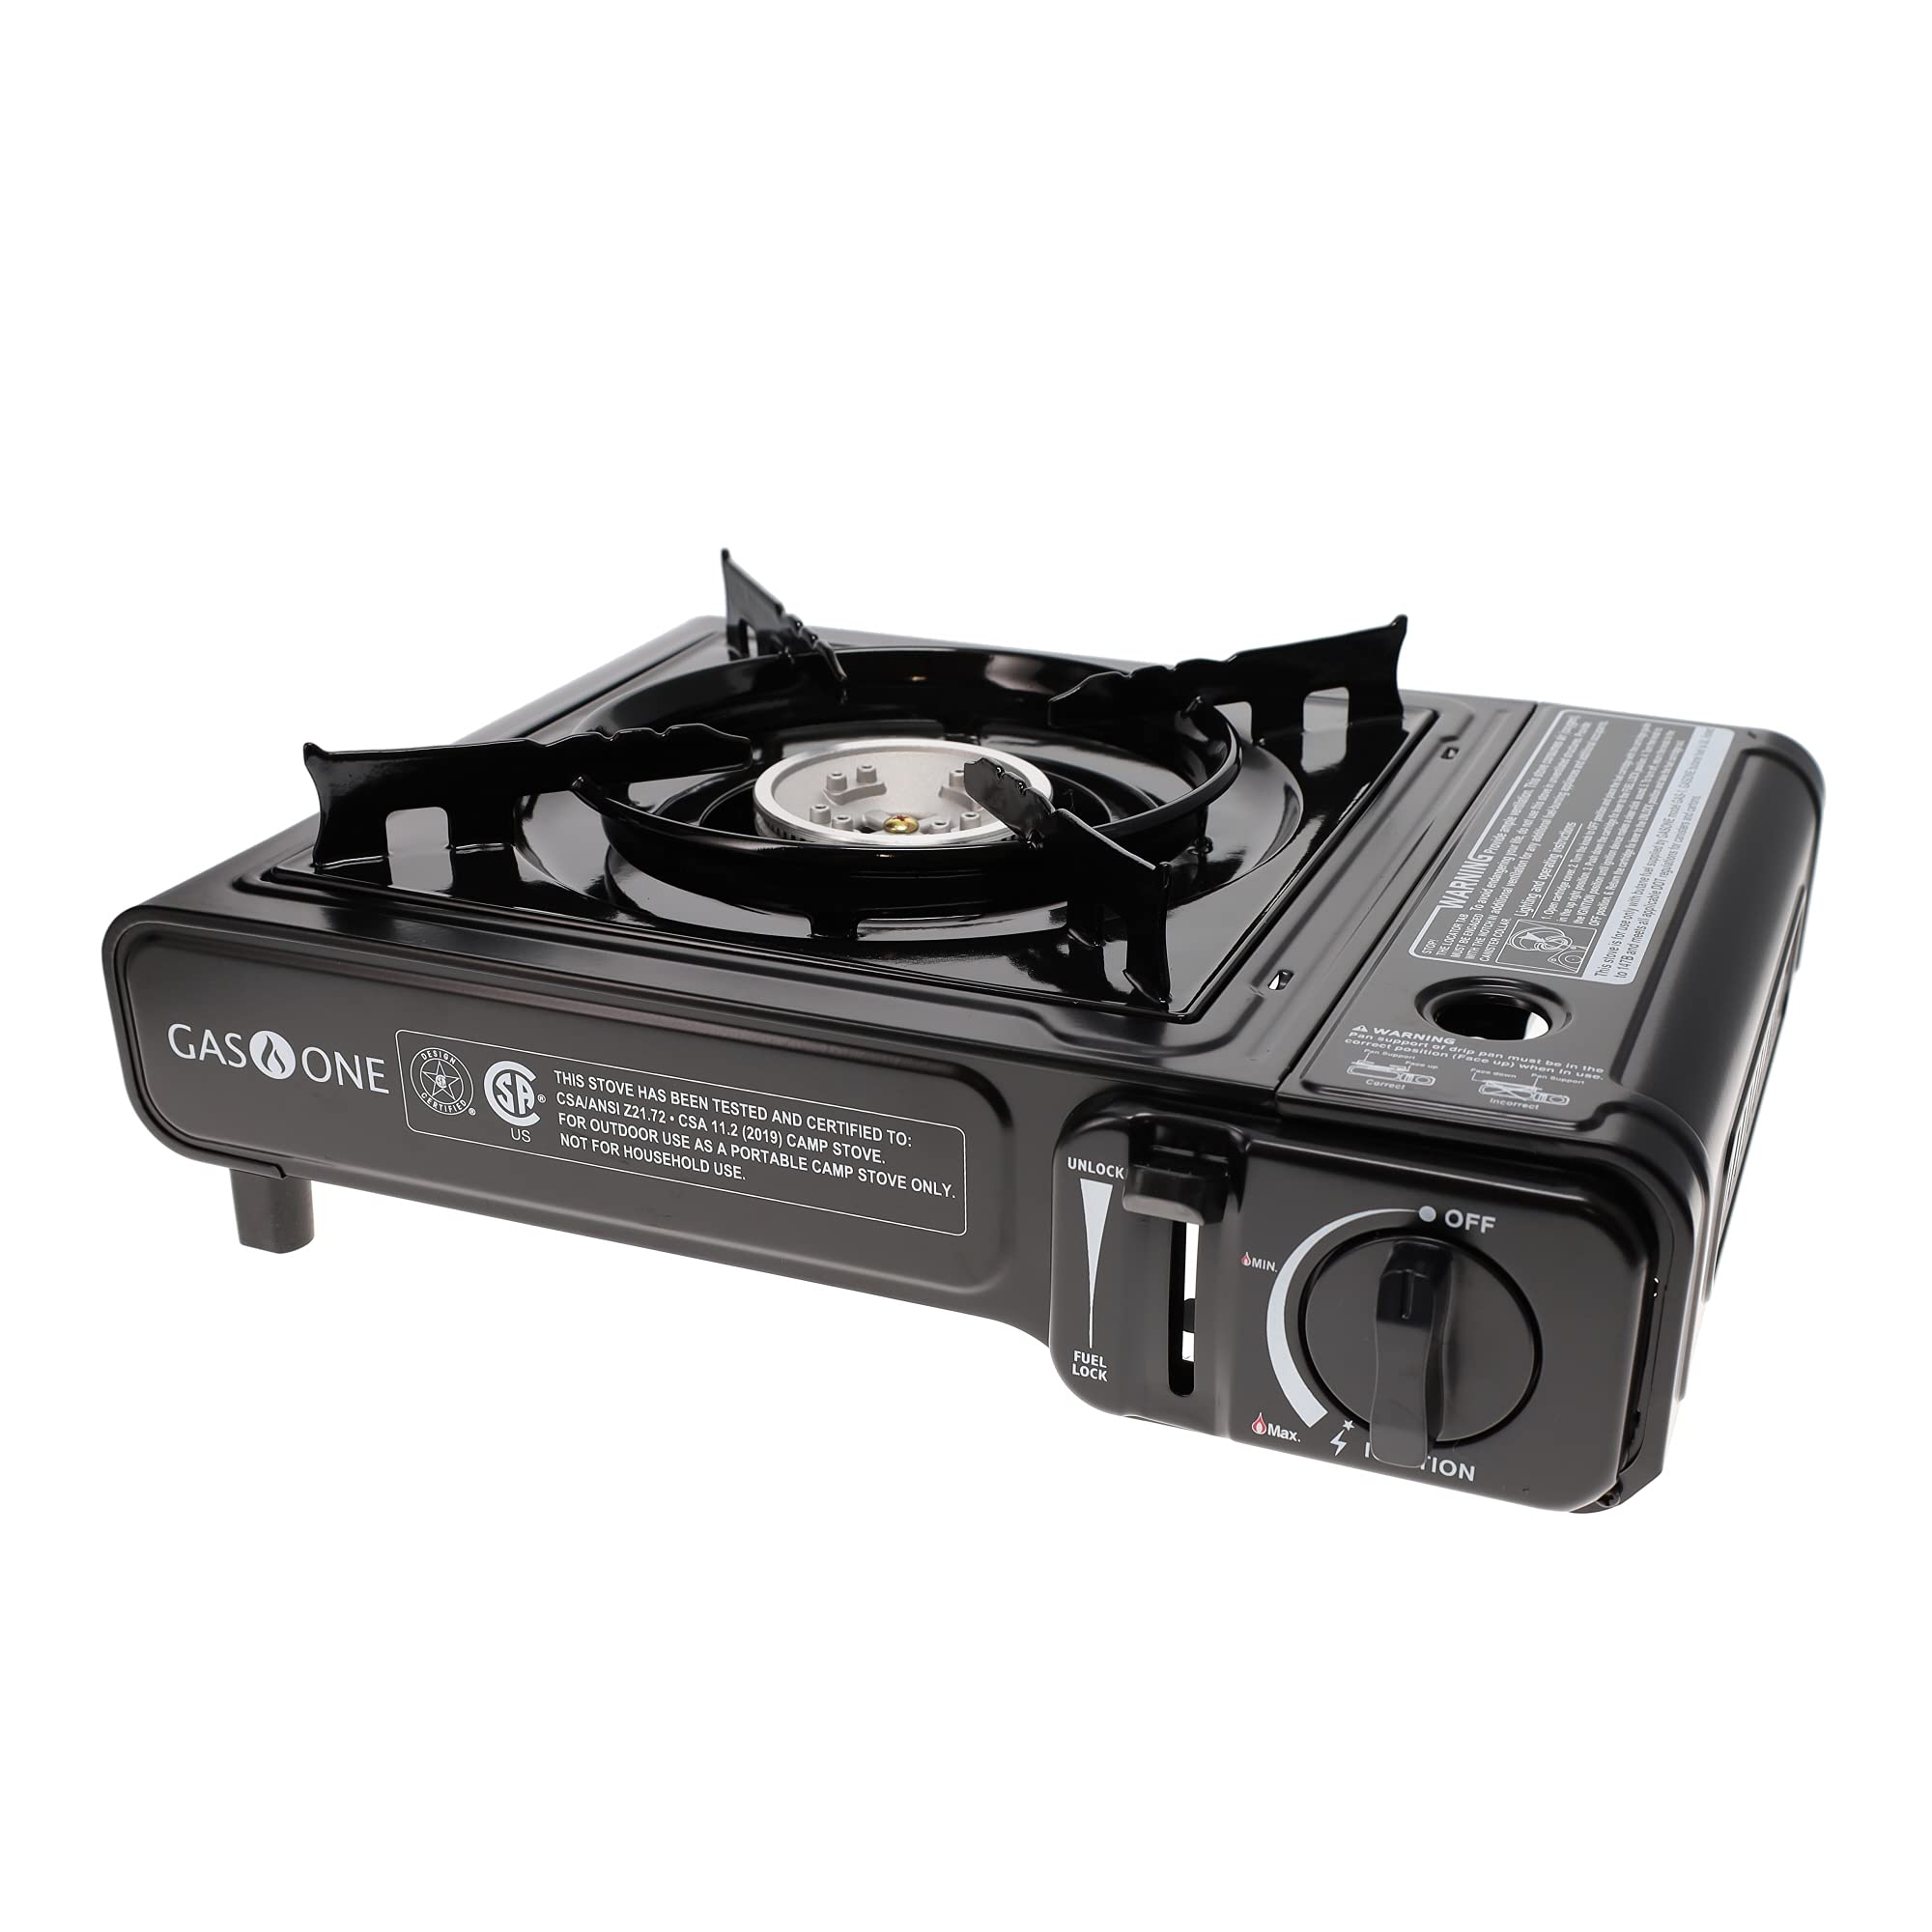 GAS ONE GS-3000 Portable Gas Stove